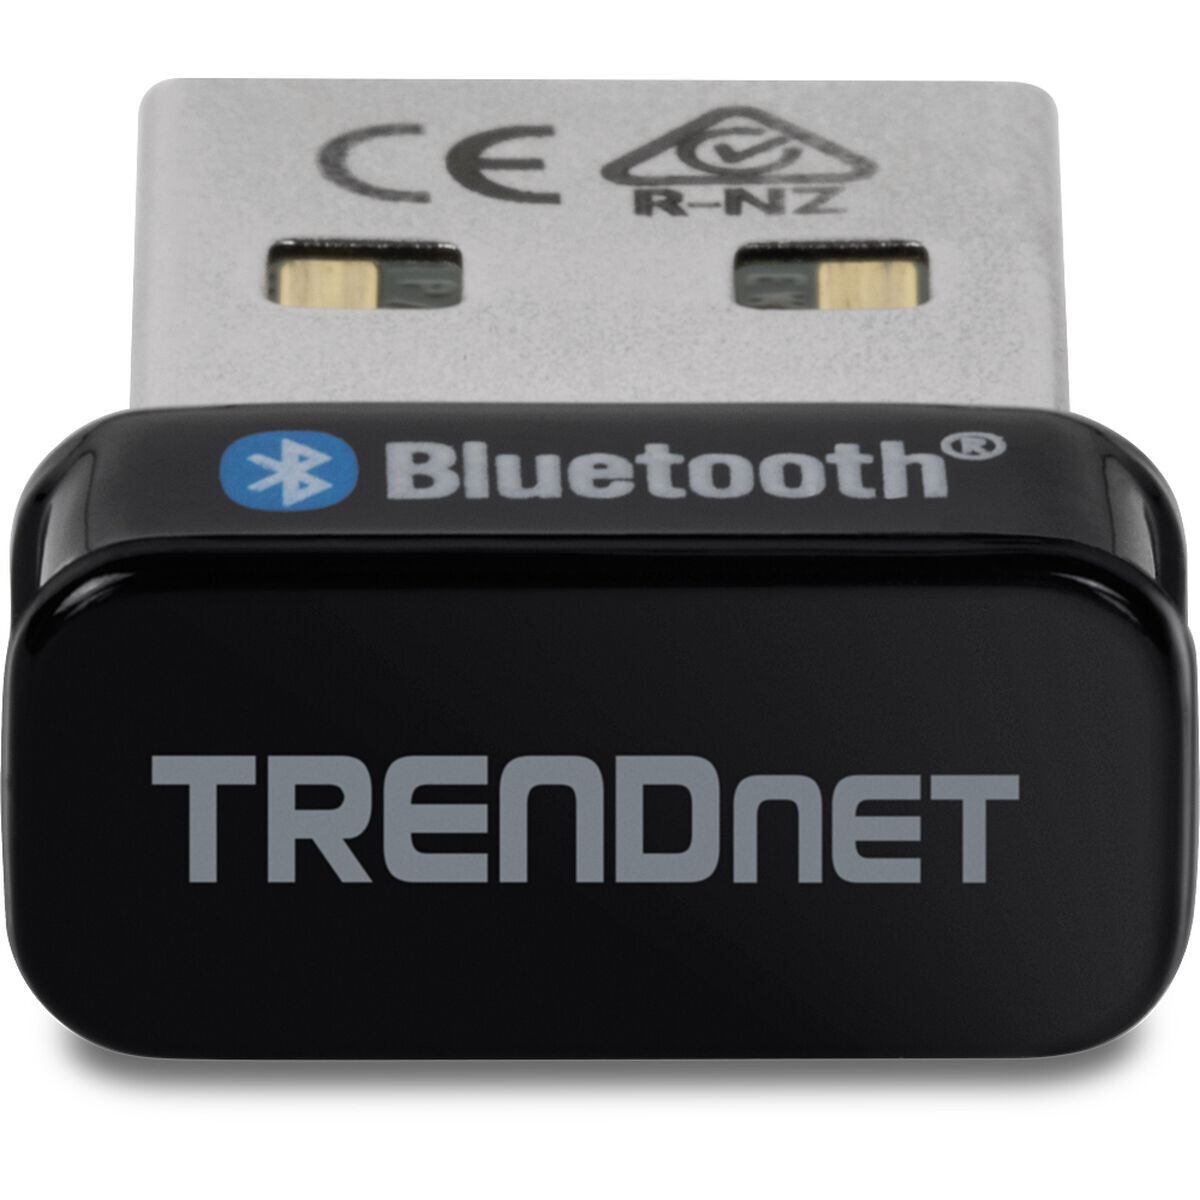 https://content.pearl.fr/media/cache/default/article_ultralarge_high_nocrop/shared/images/articles/T/TG2/dongle-usb-tbw-110ub-avec-fonction-bluetooth-5-0-br-edr-ble-ref_TG2483_2.jpg